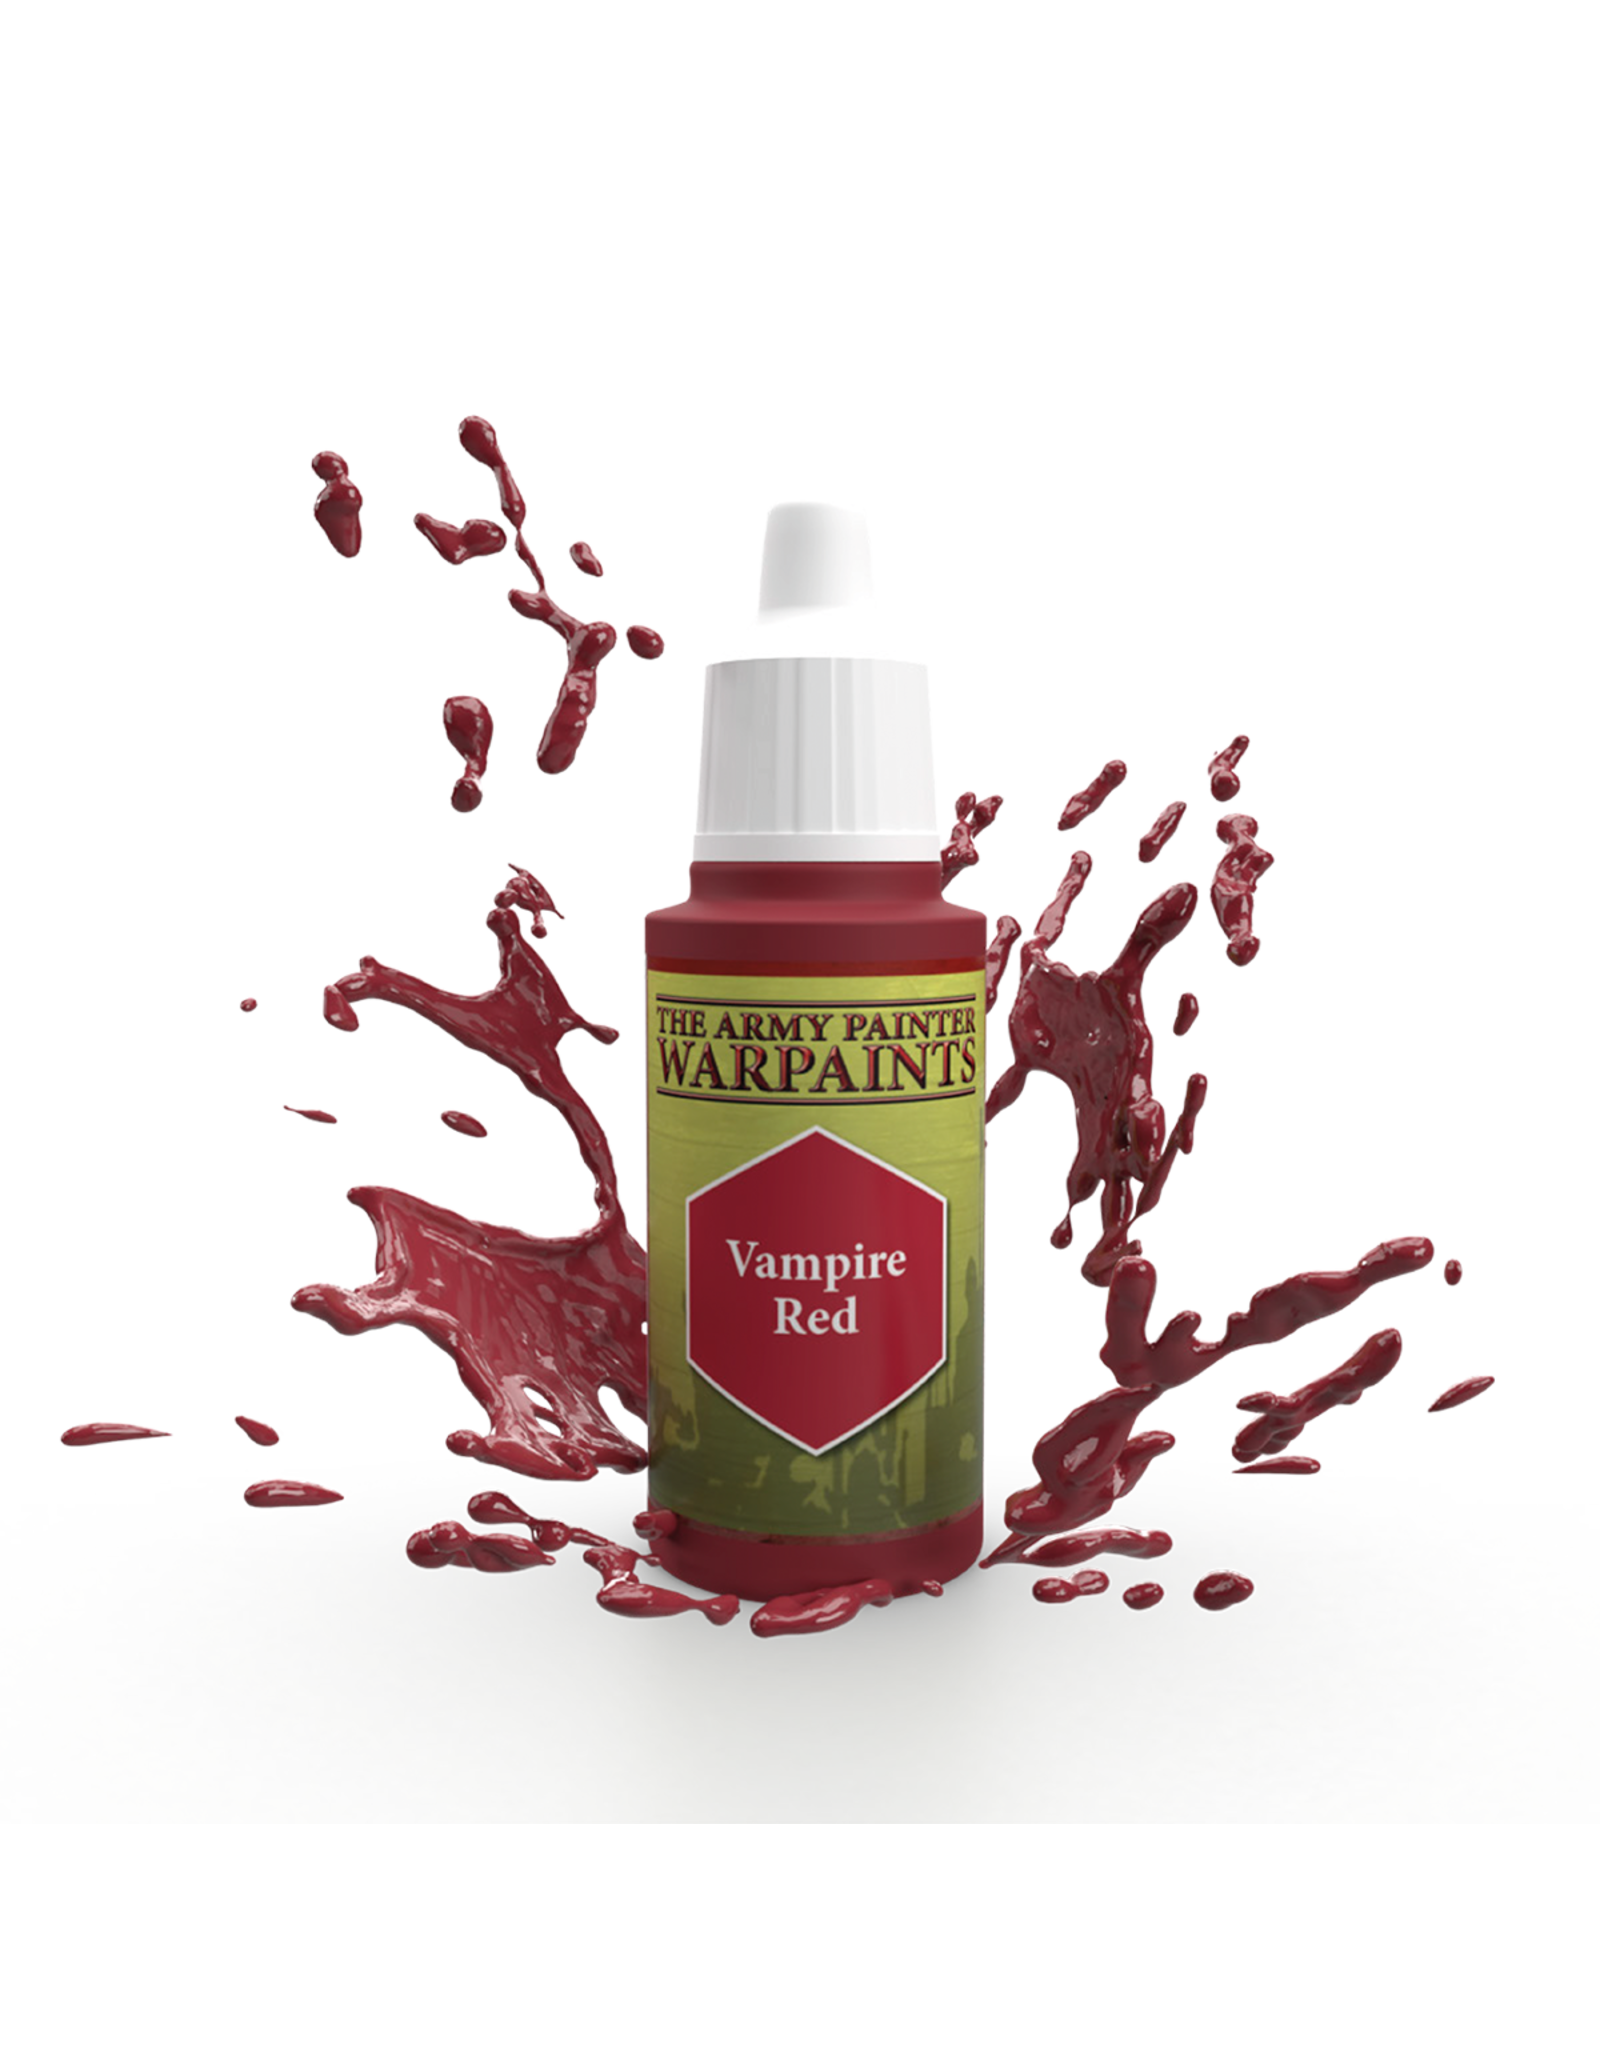 The Army Painter WP1460 Vampire Red